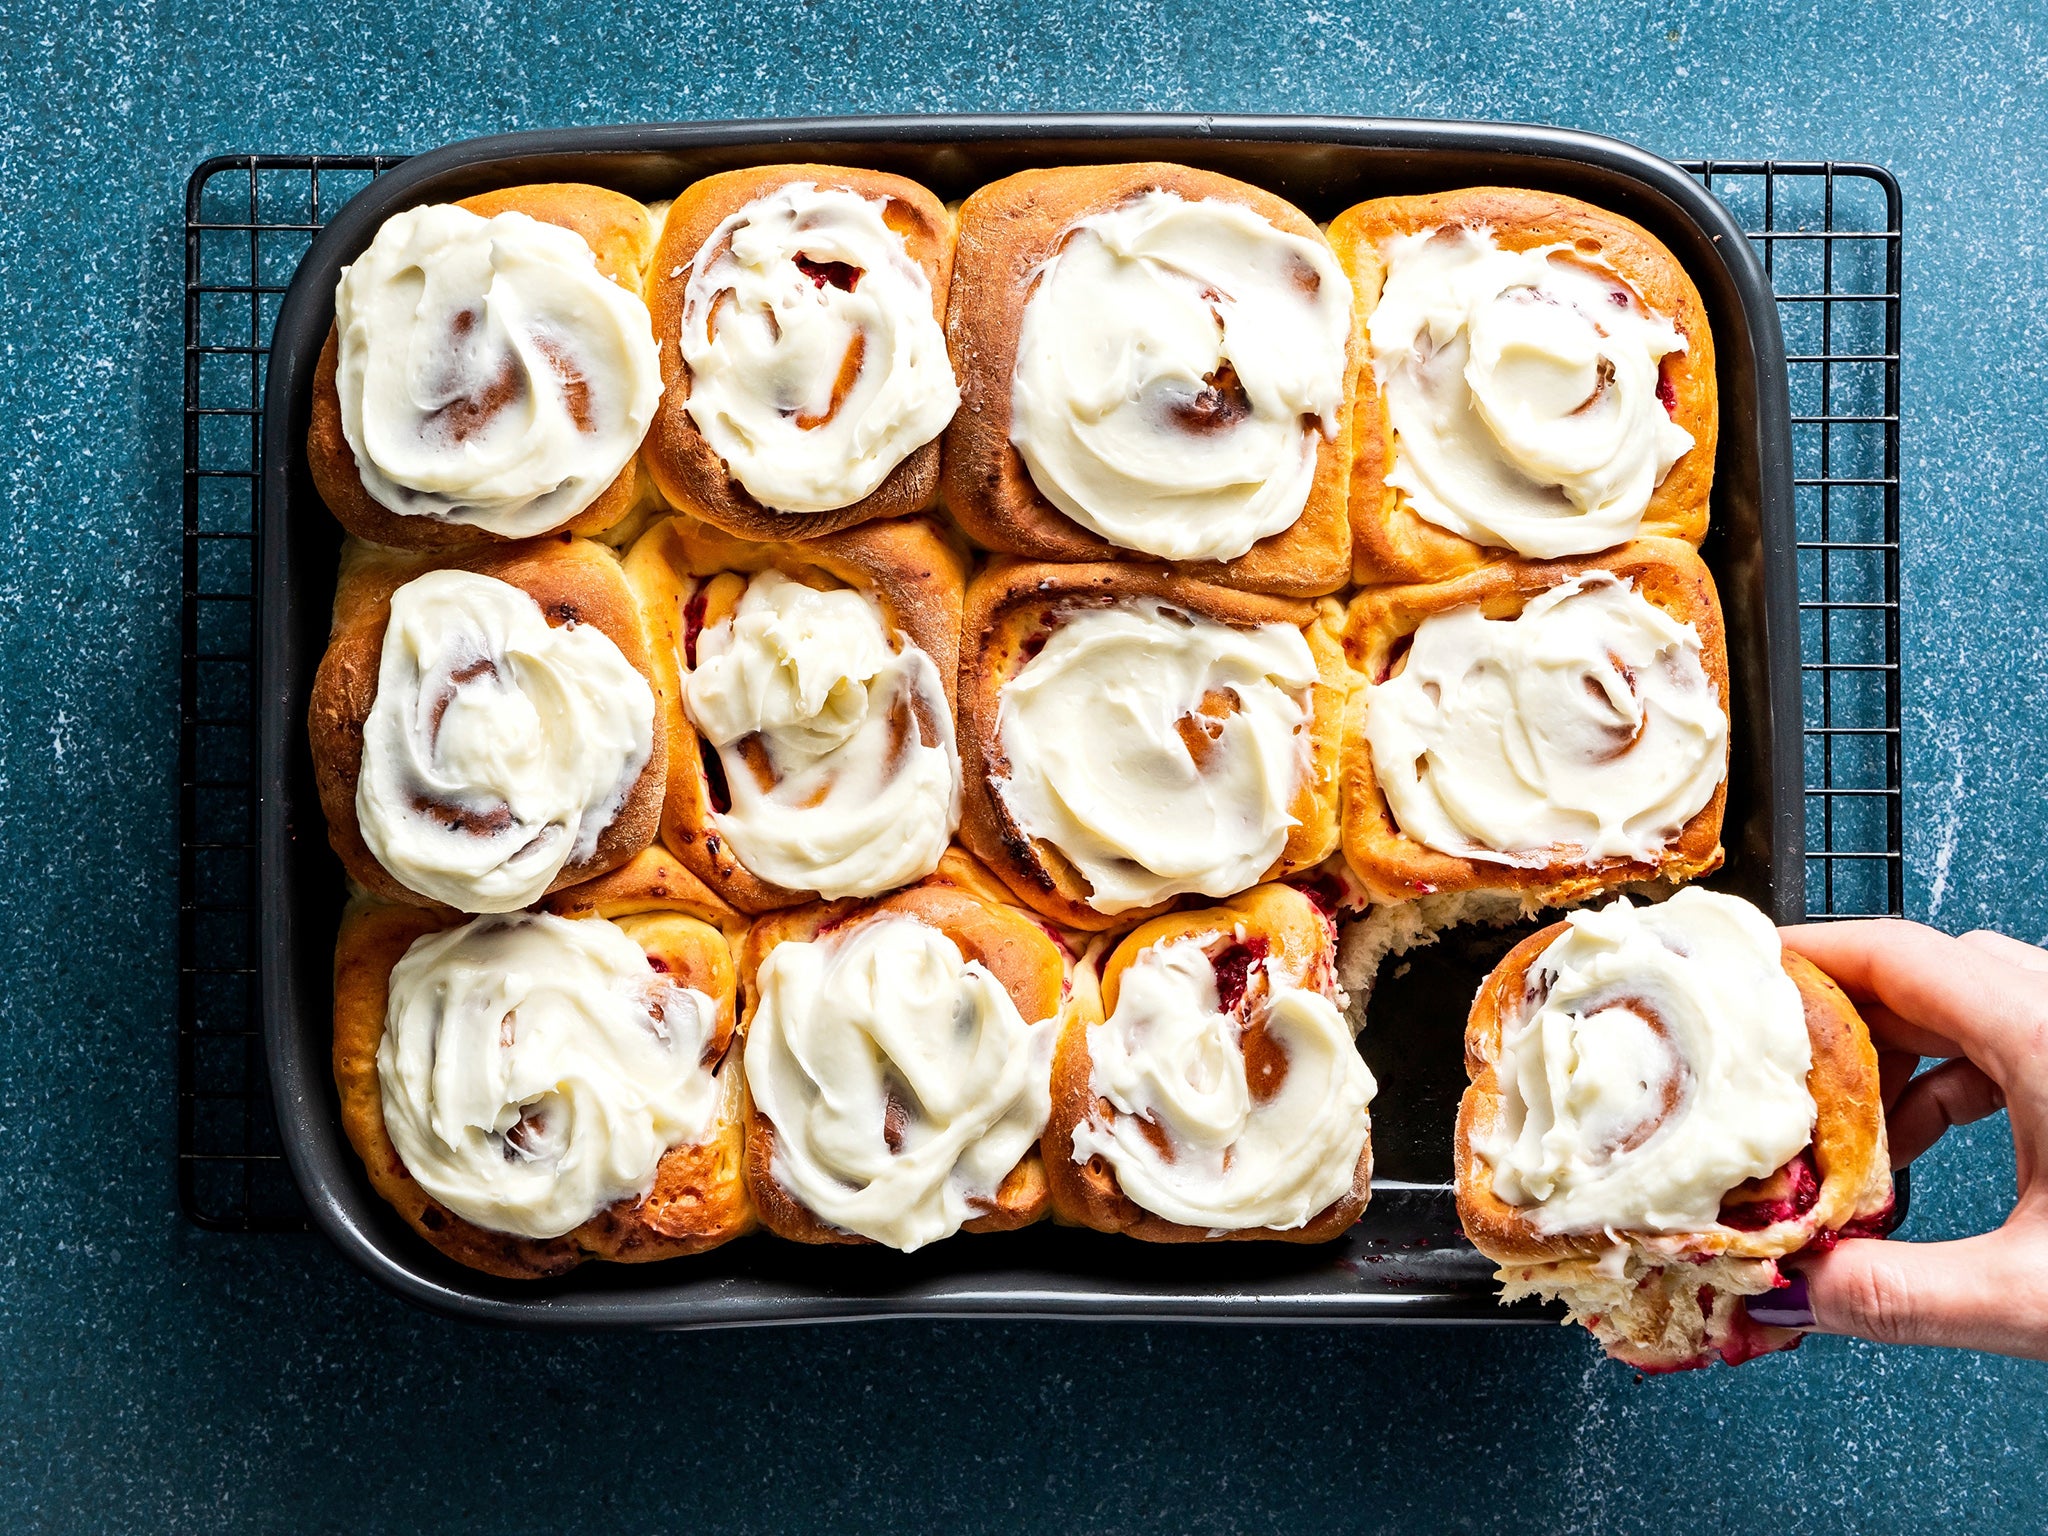 Tangy cream cheese enriches the dough for these sweet-and-tart breakfast rolls